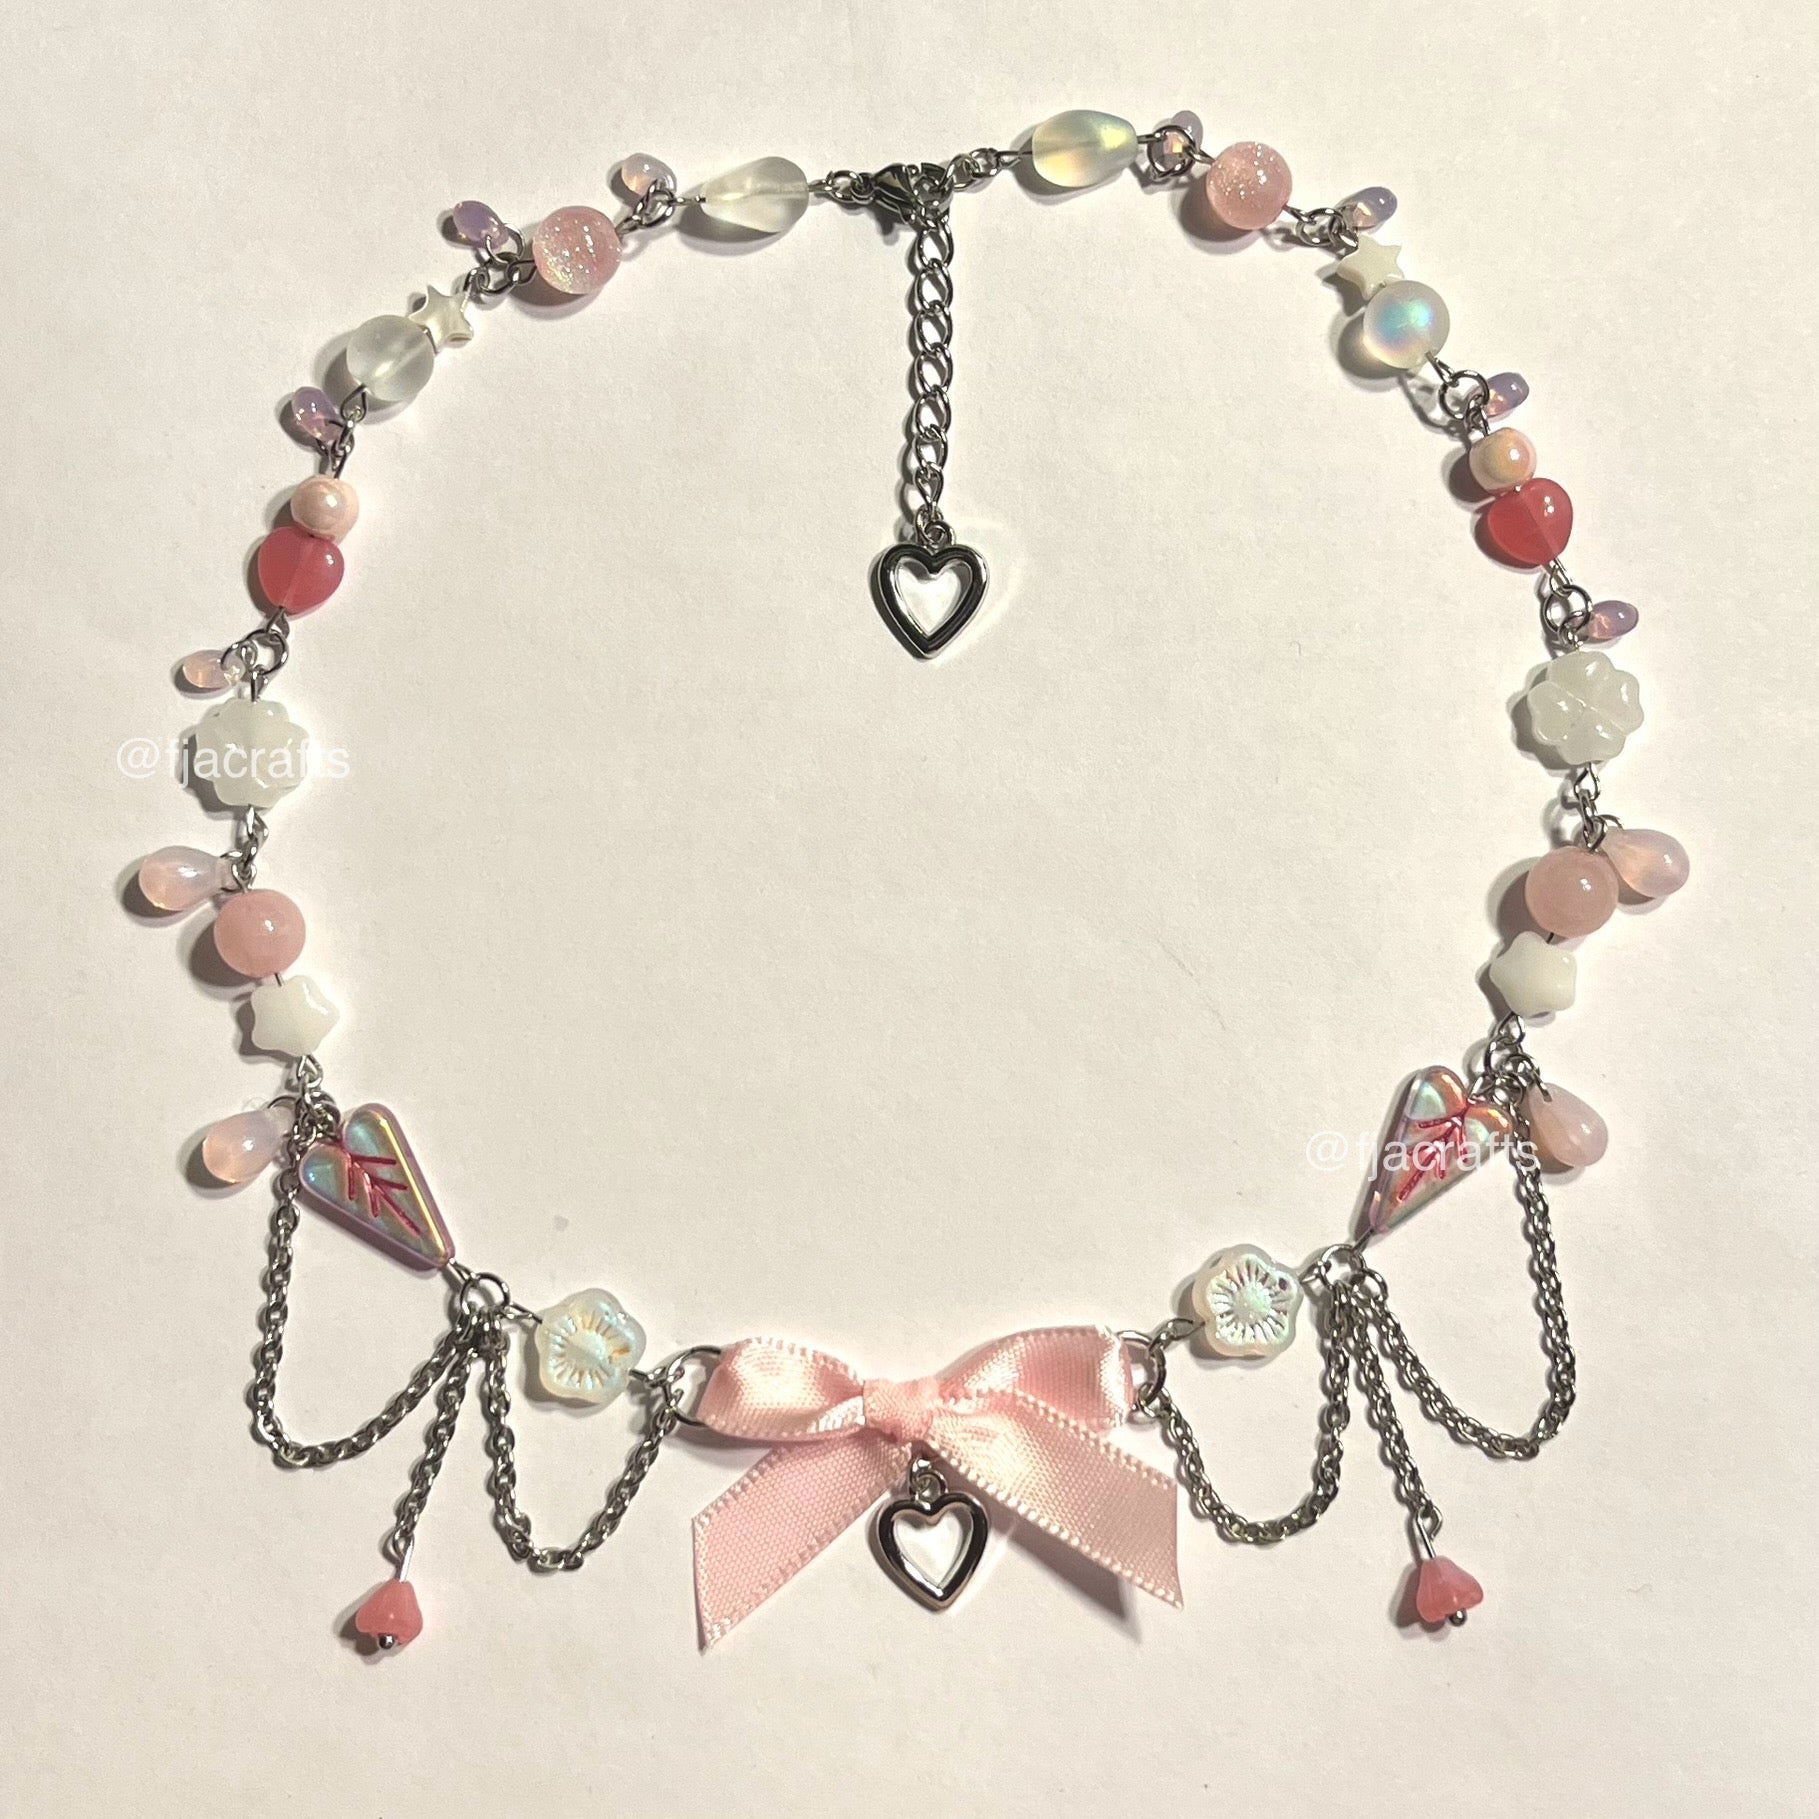 Clutter Necklace | heart pink bows silver cute coquette chains | Girlhood Magazine Collab FJA Crafts